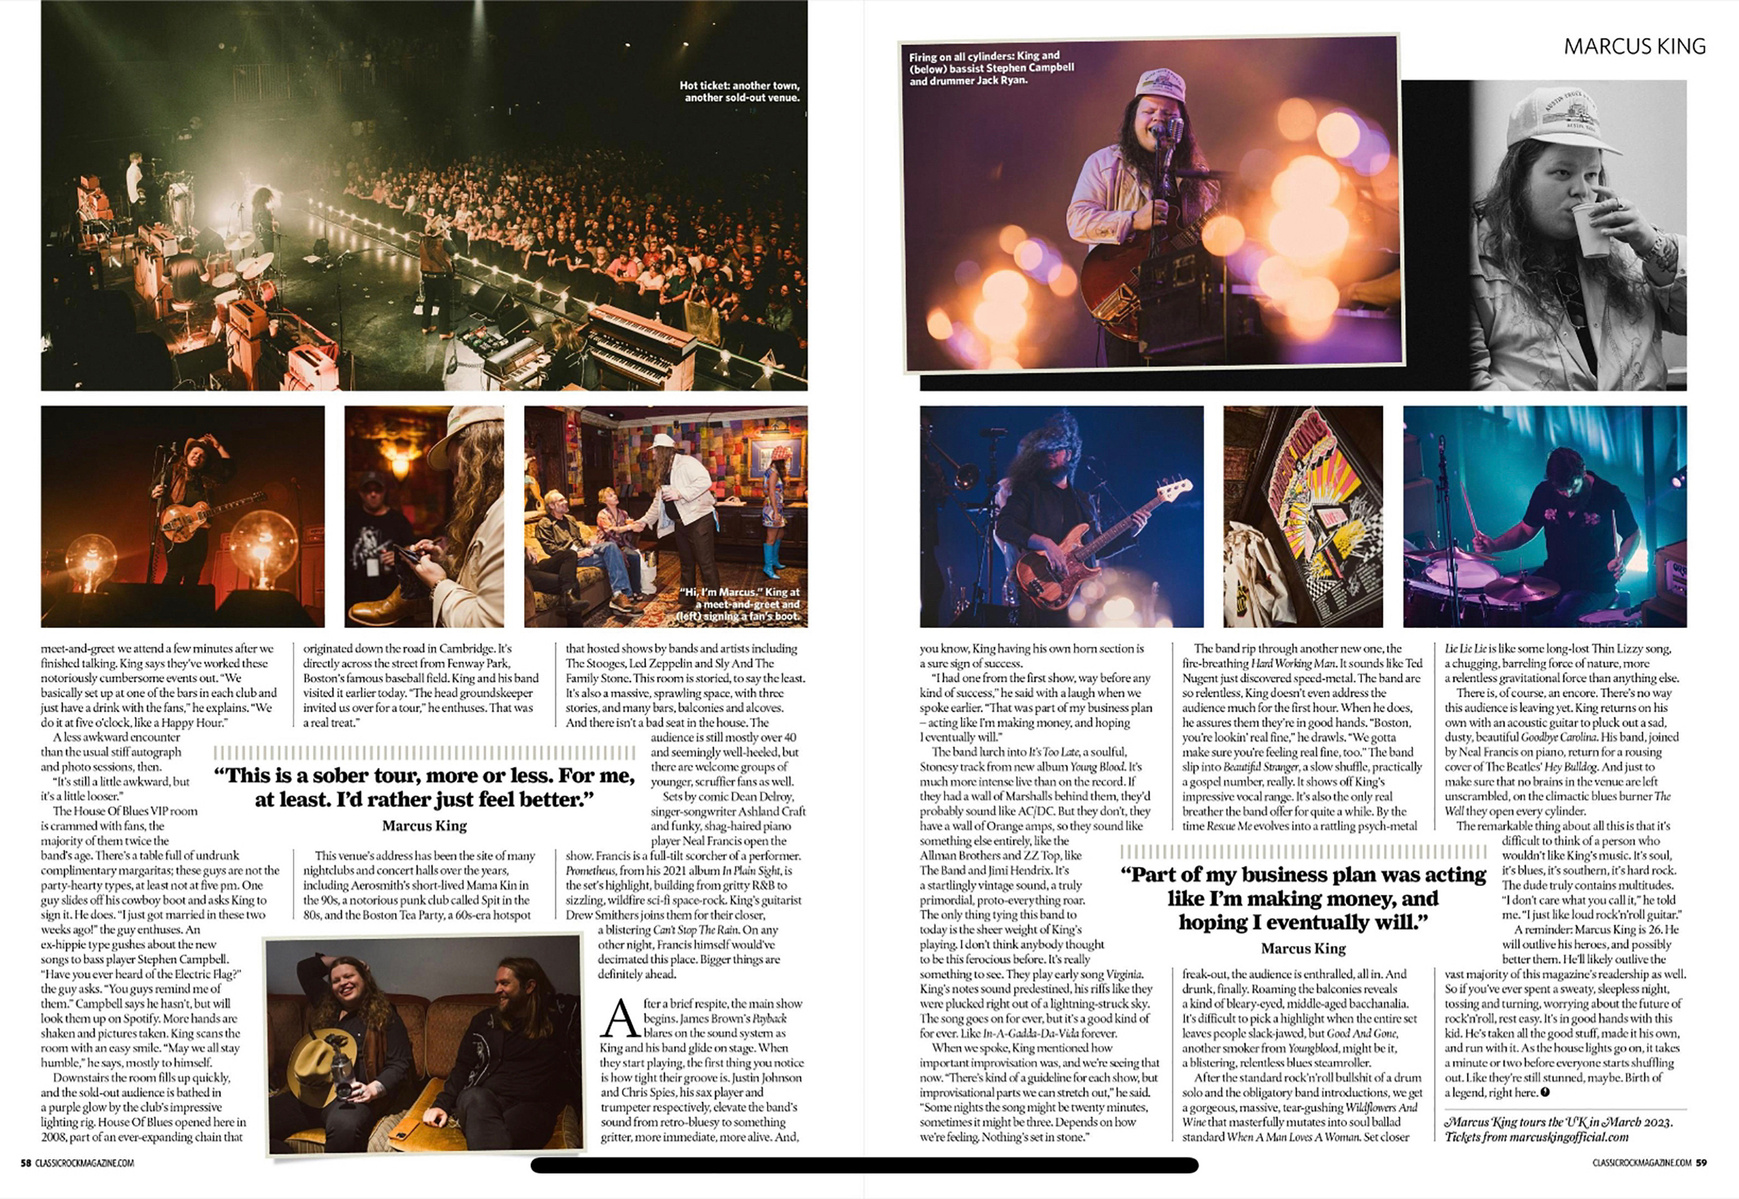 Feature of Marcus King in concert in Classic Rock Magazine by Boston music photographer Lisa Czech